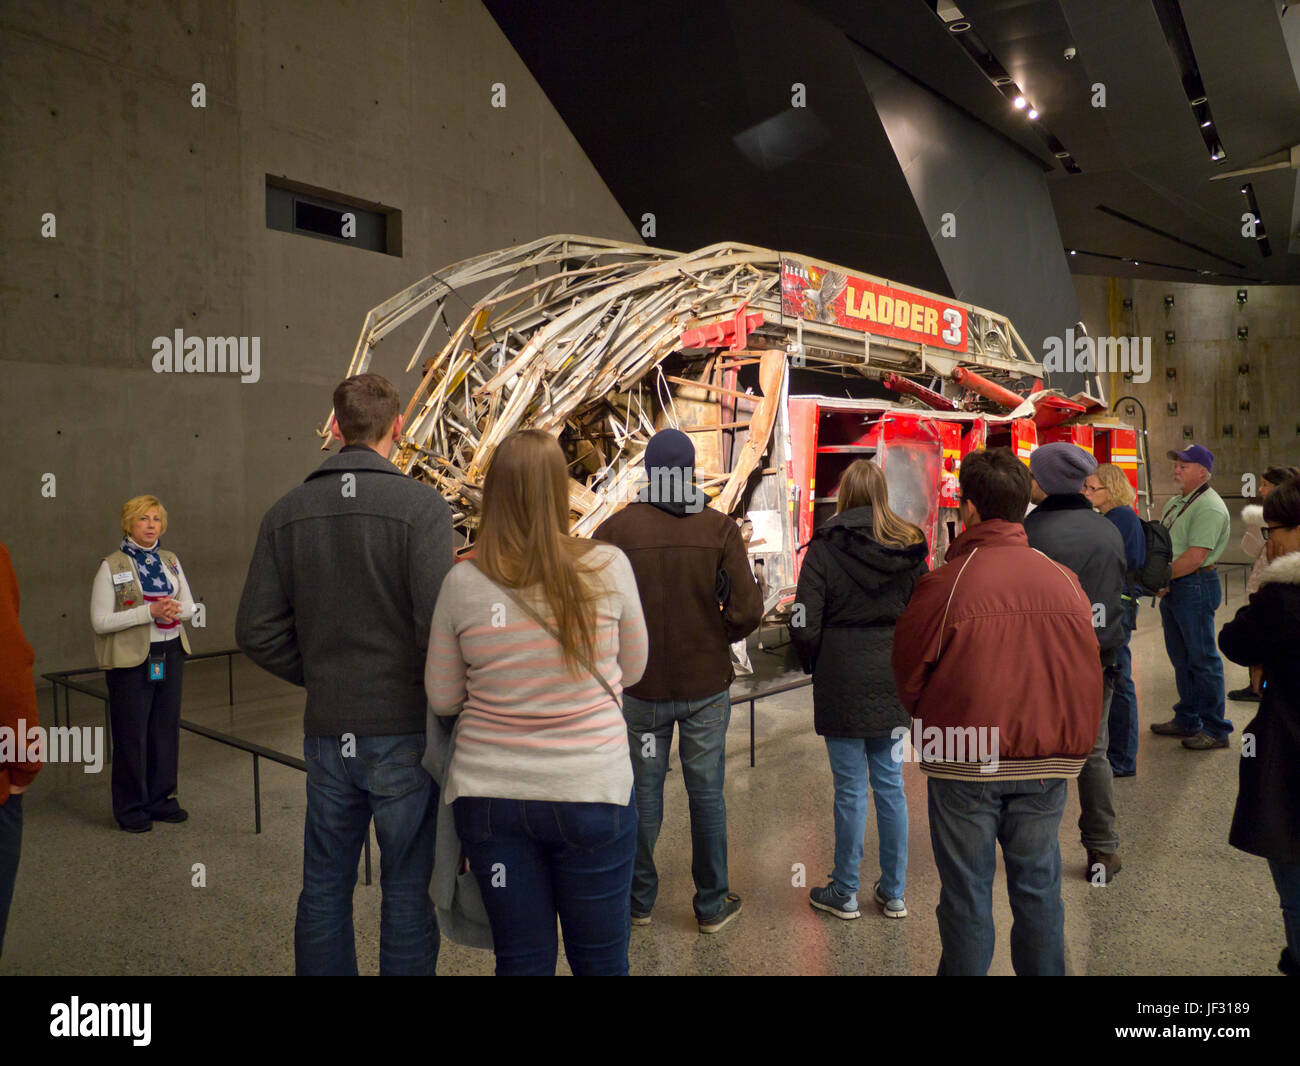 Reste de NYC fire truck, 9/11 Memorial and Museum, New York Banque D'Images